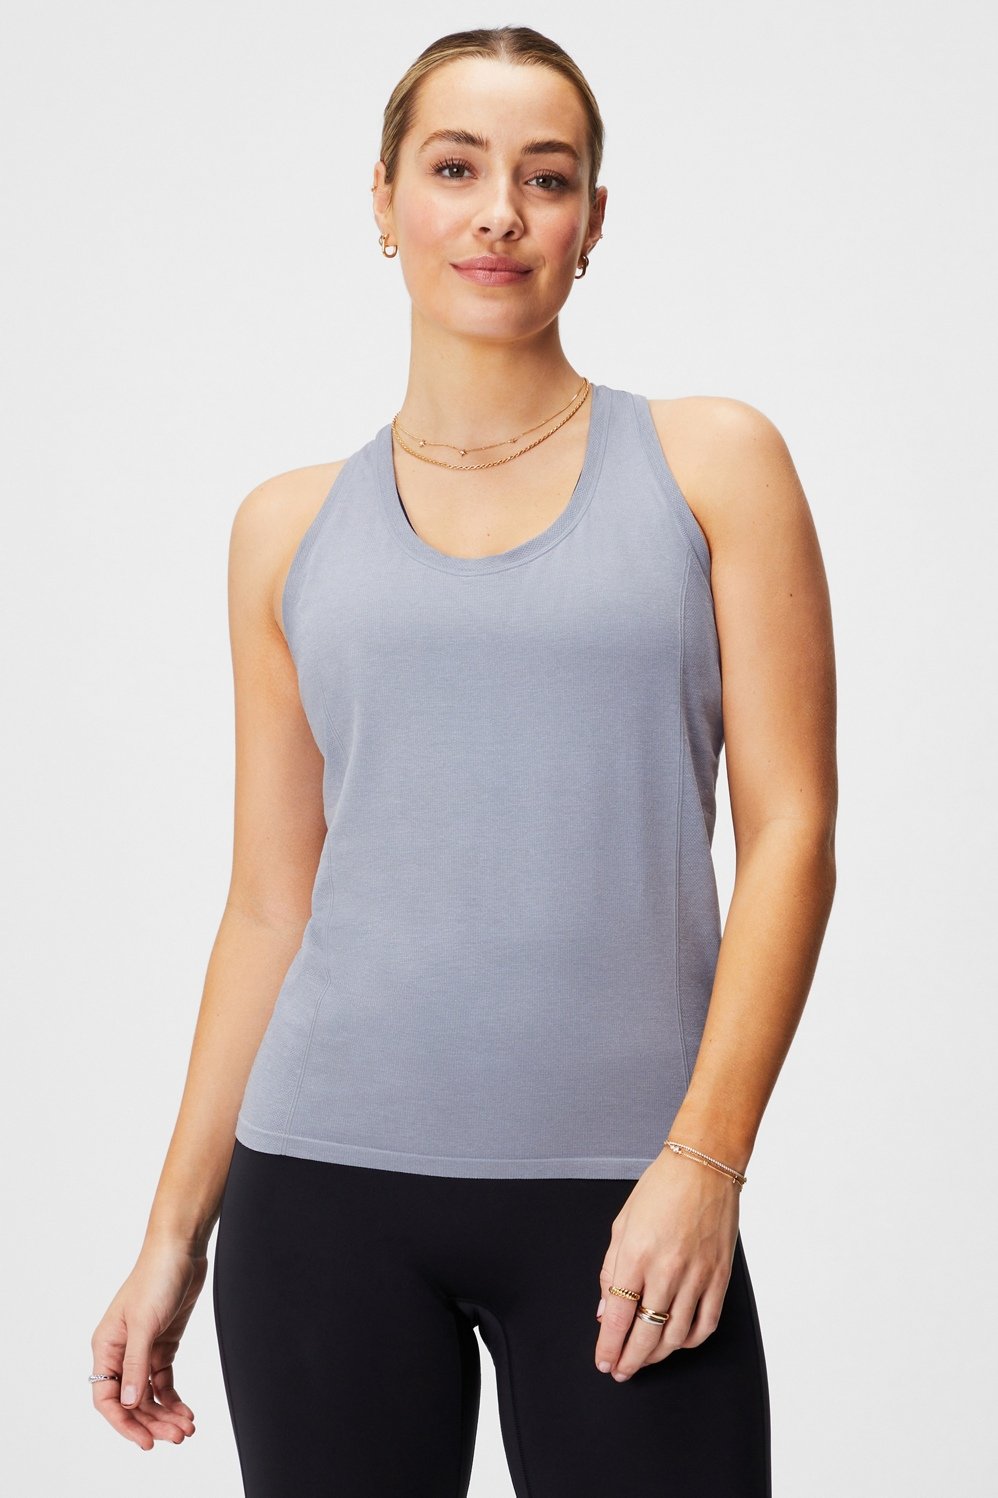 Fabletics NWT Heather Gray Kathie Seamless Ruched Tank Top Sz XS